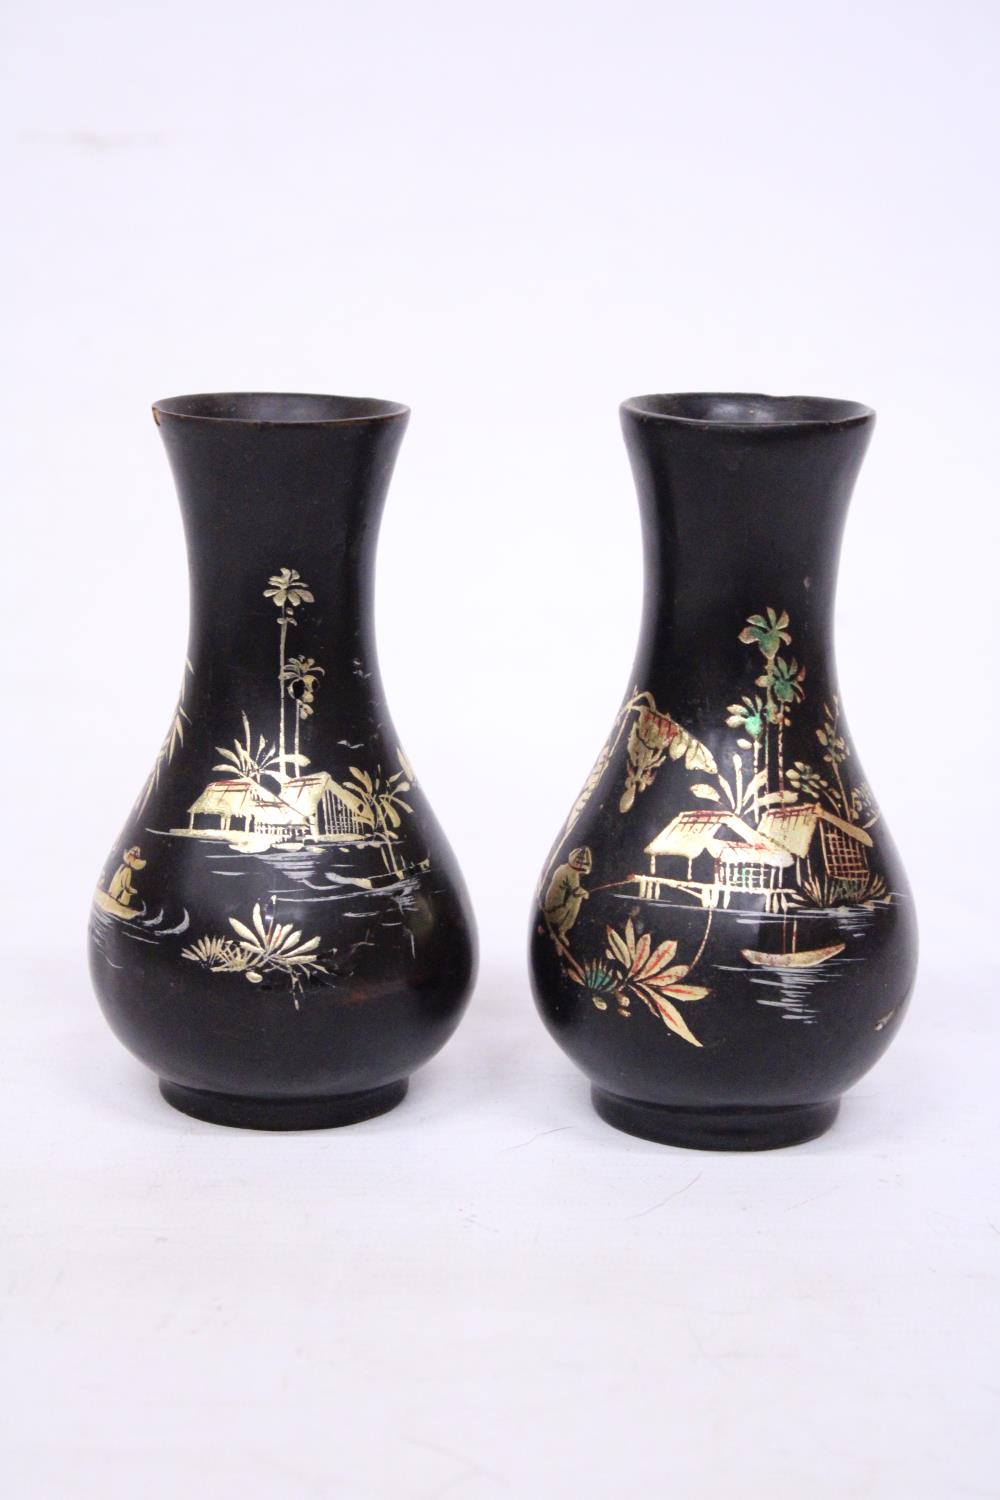 A PAIR OF FOOTED WOODEN LACQUER VASES WITH ORIENTAL SCENES - 14 CM (H)